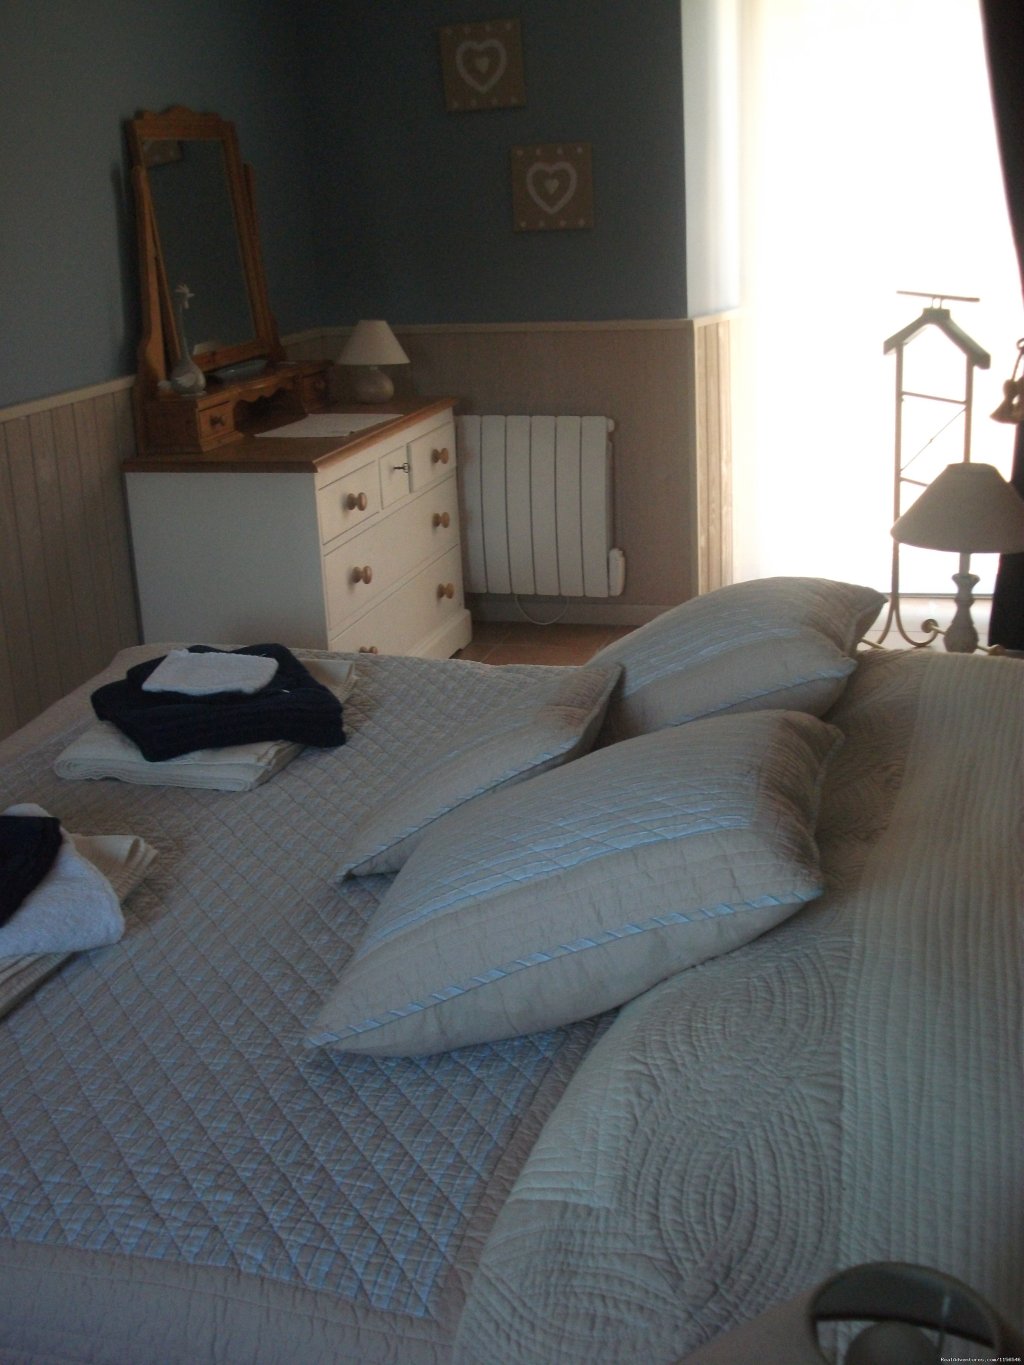 La Porte Bleue | B+B/self-catering accomodations in Normandy | Image #4/23 | 